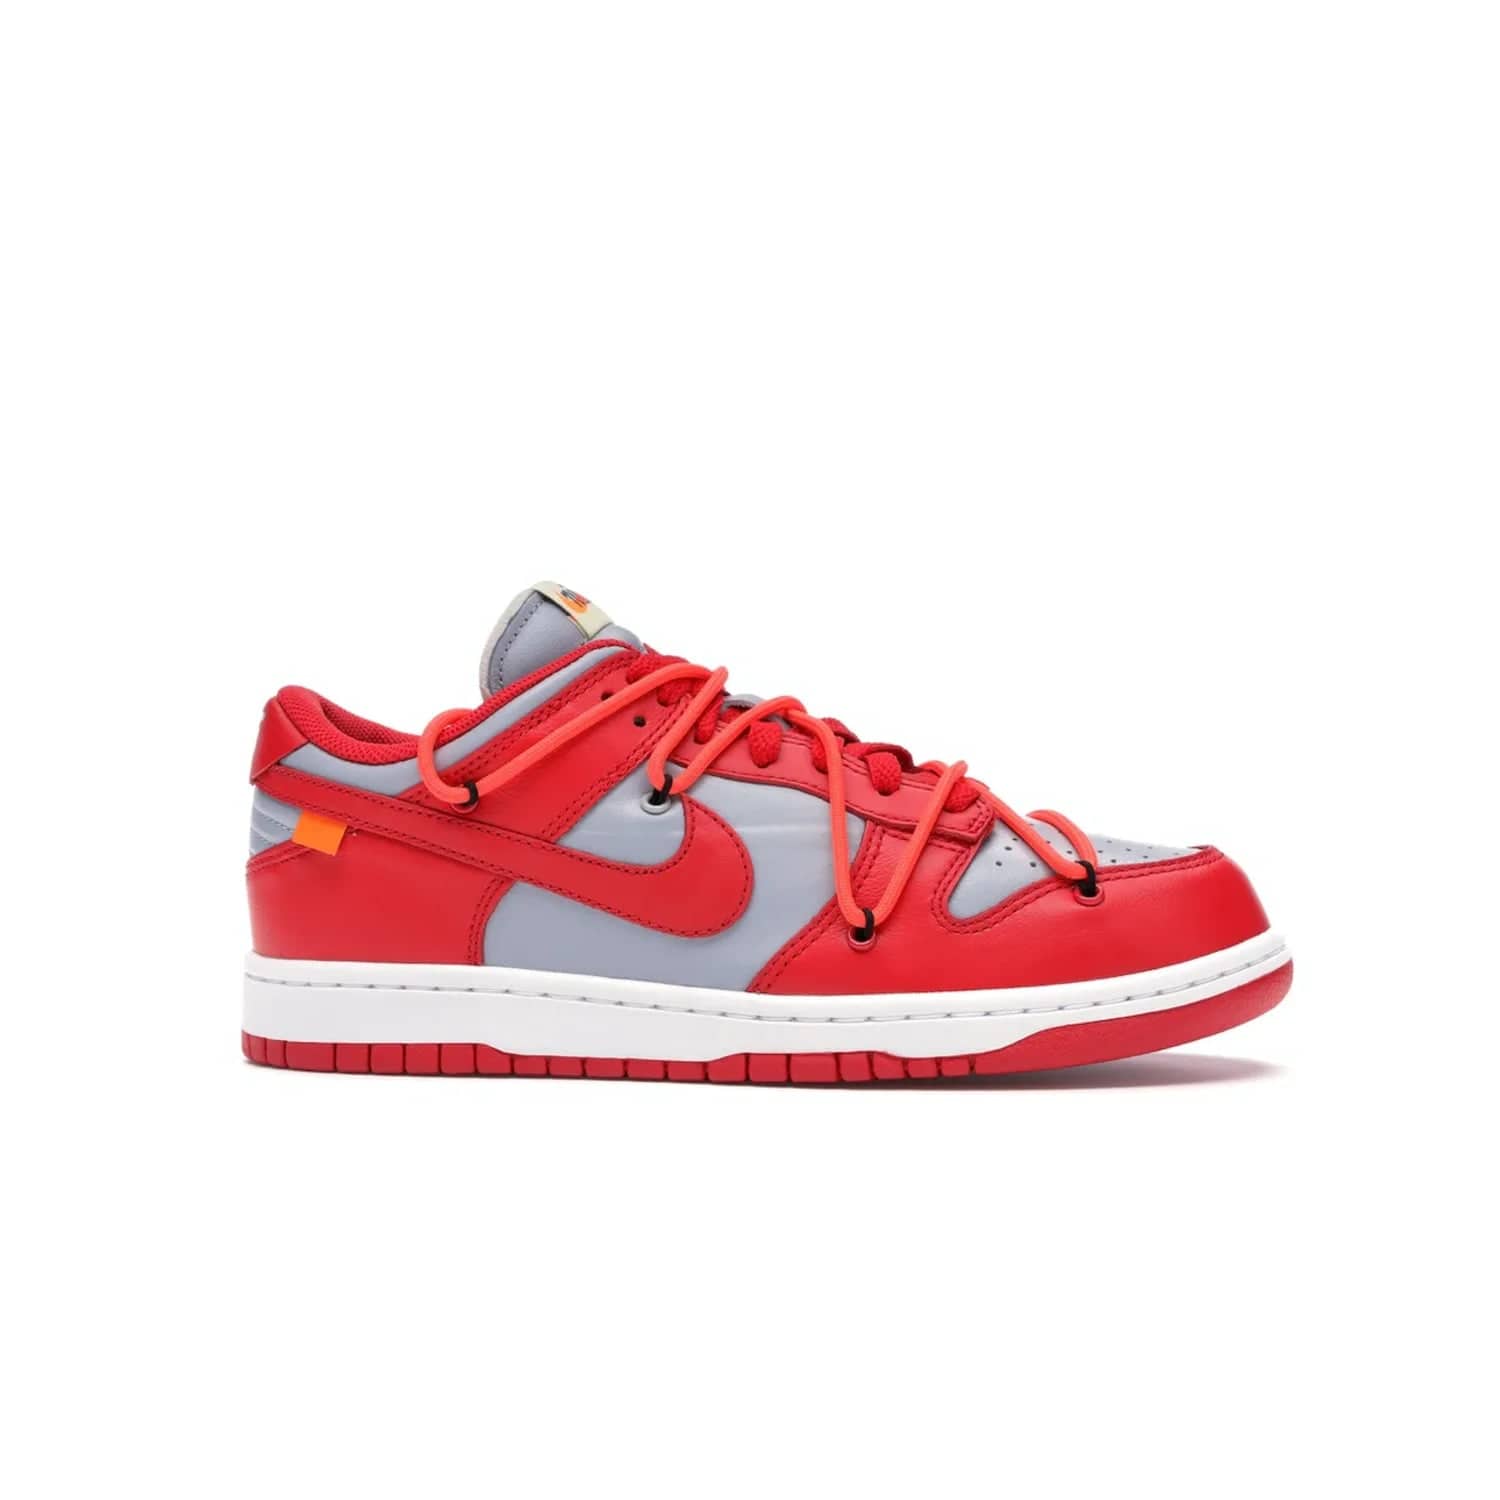 Nike Dunk Low Off-White University Red - Image 2 - Only at www.BallersClubKickz.com - The Nike Dunk Low Off-White University Red offers tribute to classic Nike Basketball silhouettes. Features include wolf grey leather, university red overlays, zip-ties, and Off-White text. Perfect for any sneaker fan, these stylish sneakers released in December of 2019.